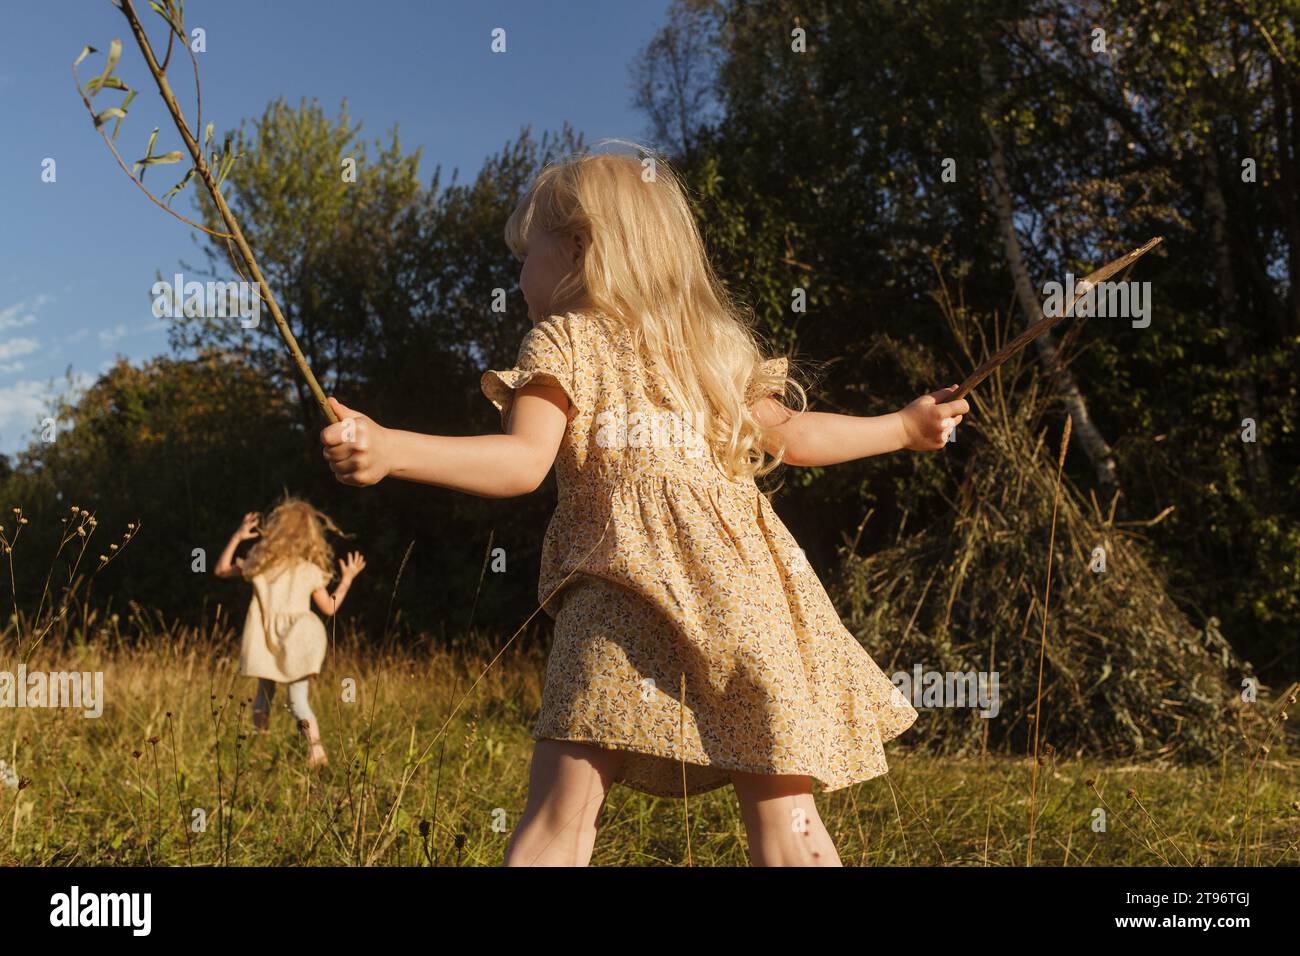 Back view of little blond haired girl in summer dress holding sticks while chasing sister on meadow during sunny weekend Stock Photo